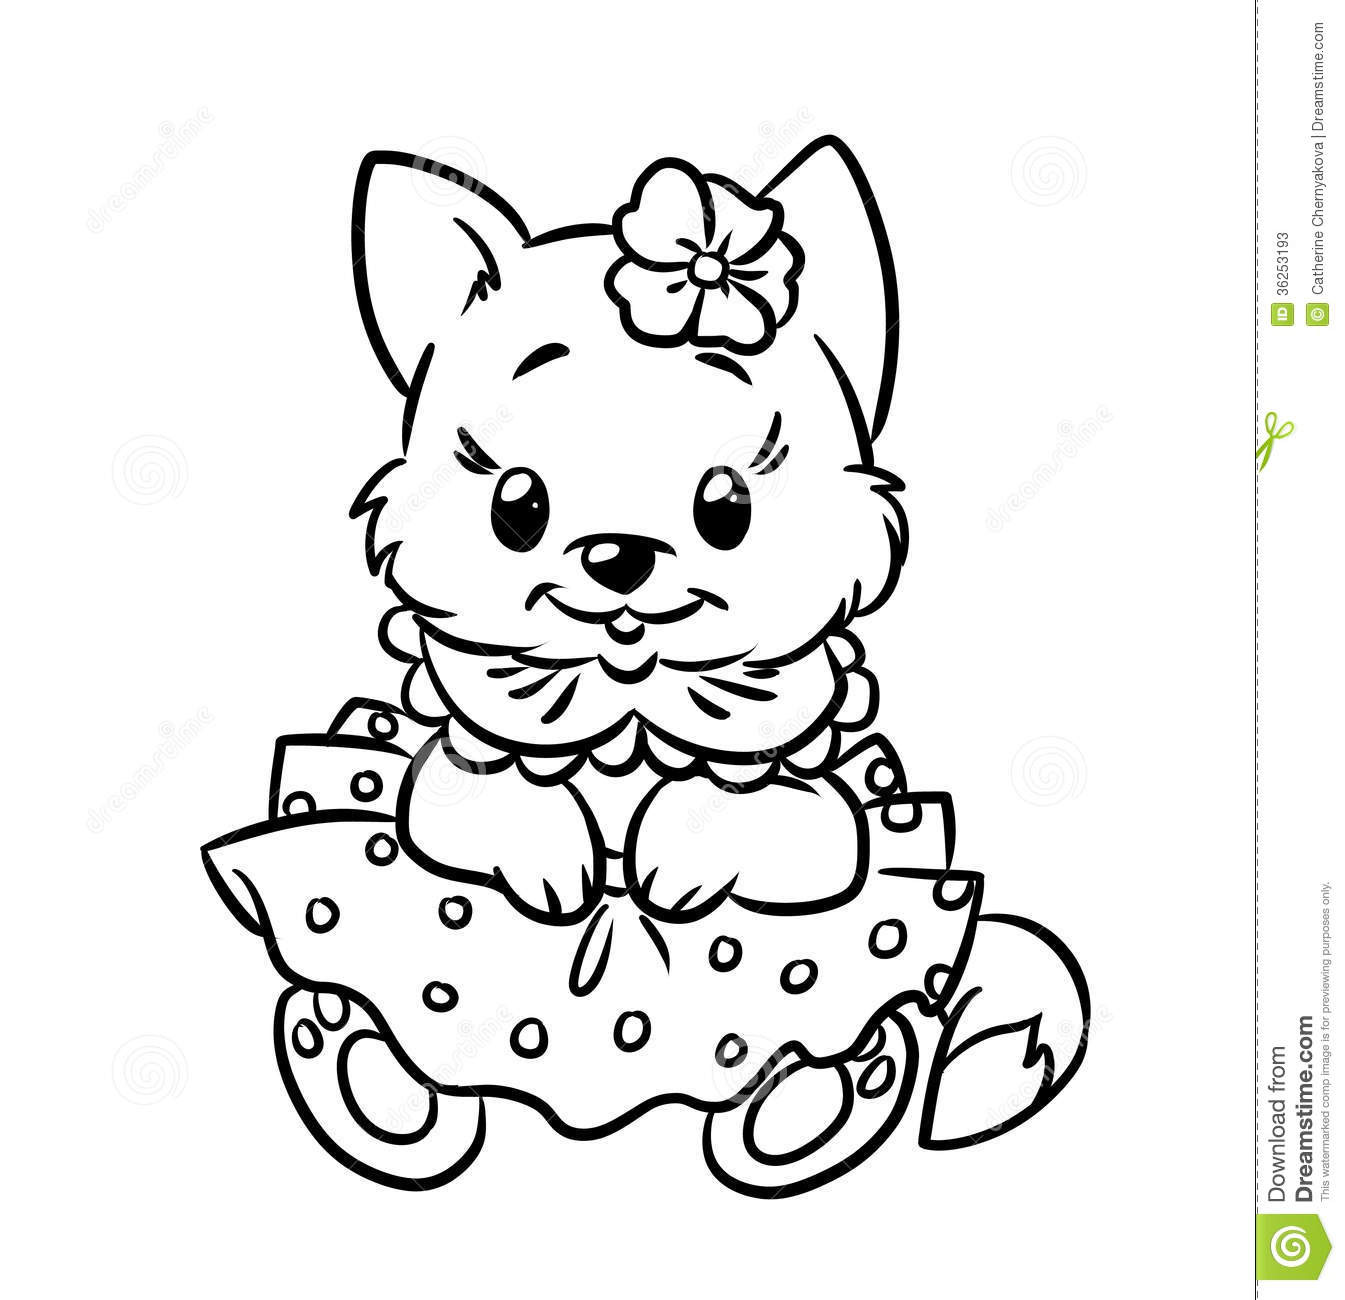 Baby Kitty Coloring Pages
 Baby kitten coloring pages stock illustration